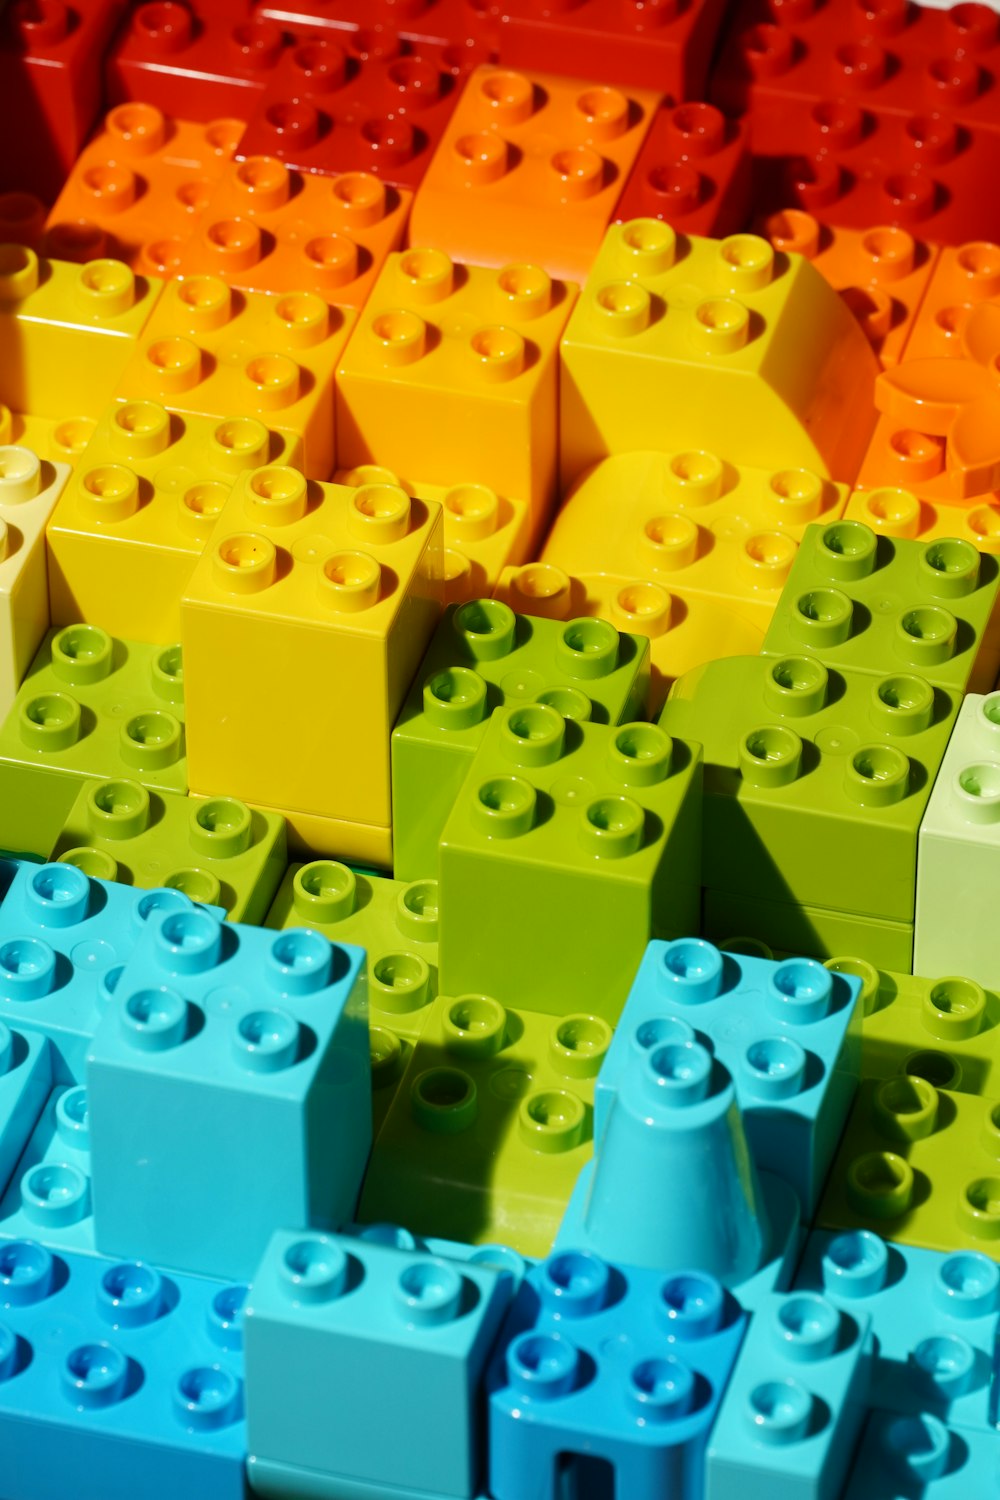 a close up of many different colored legos